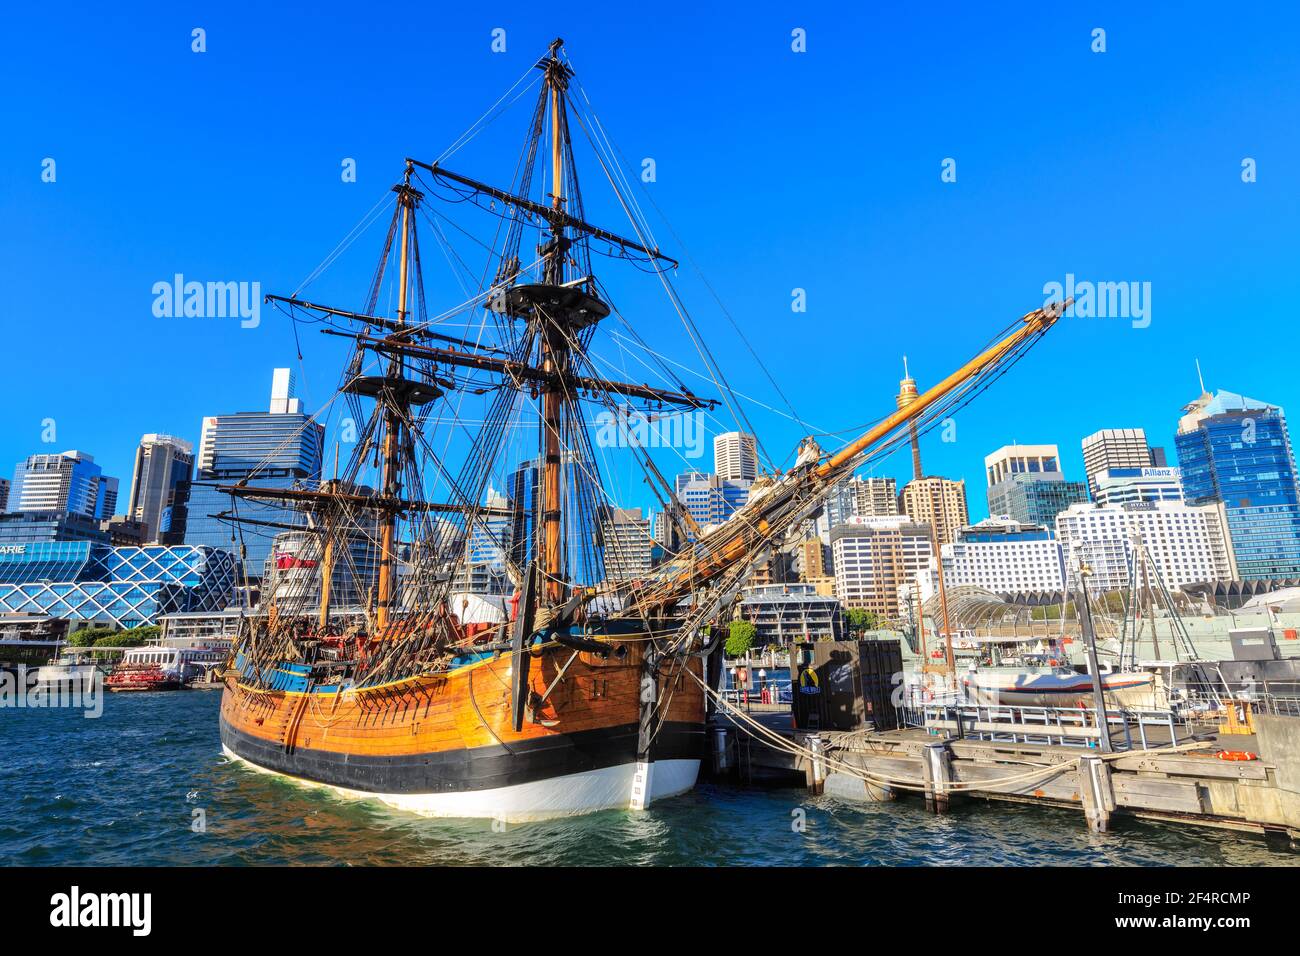 A replica of Captain Cook's famous ship, the 18th century bark HMS Endeavour, in Darling Harbour, Sydney, Australia Stock Photo